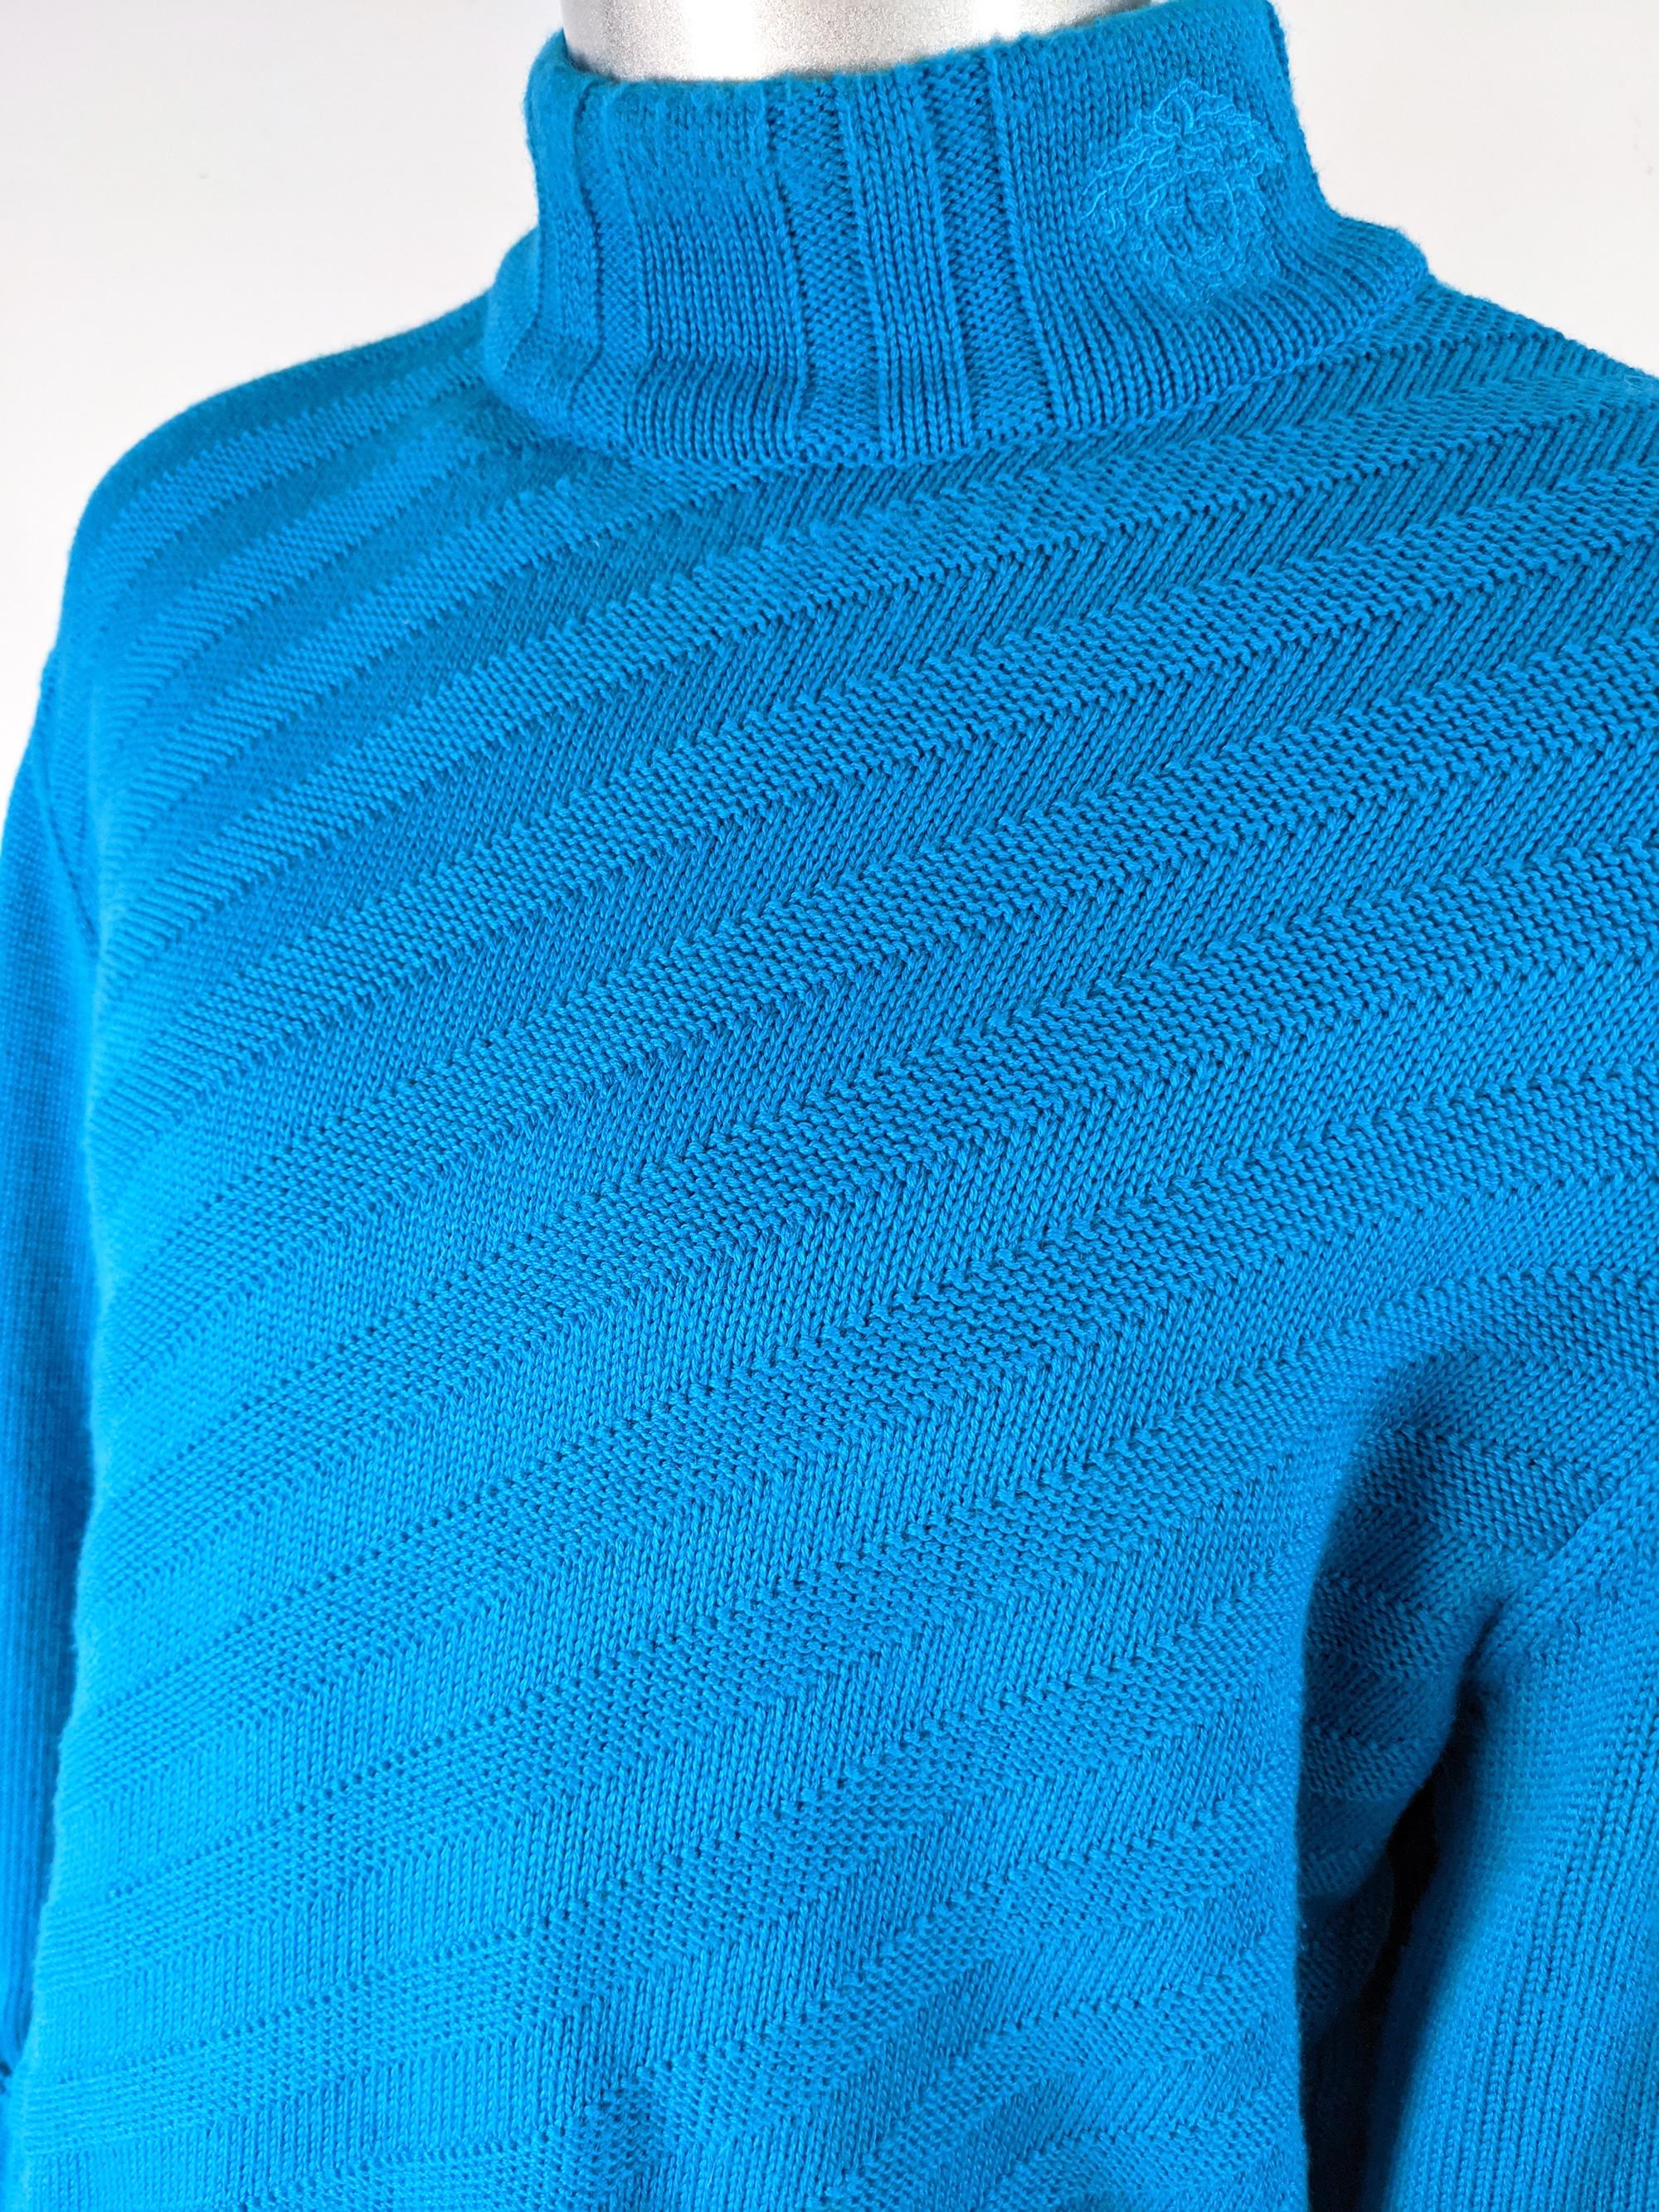 Versace Jeans Couture Mens Vintage Turquoise Sweater In Excellent Condition For Sale In Doncaster, South Yorkshire